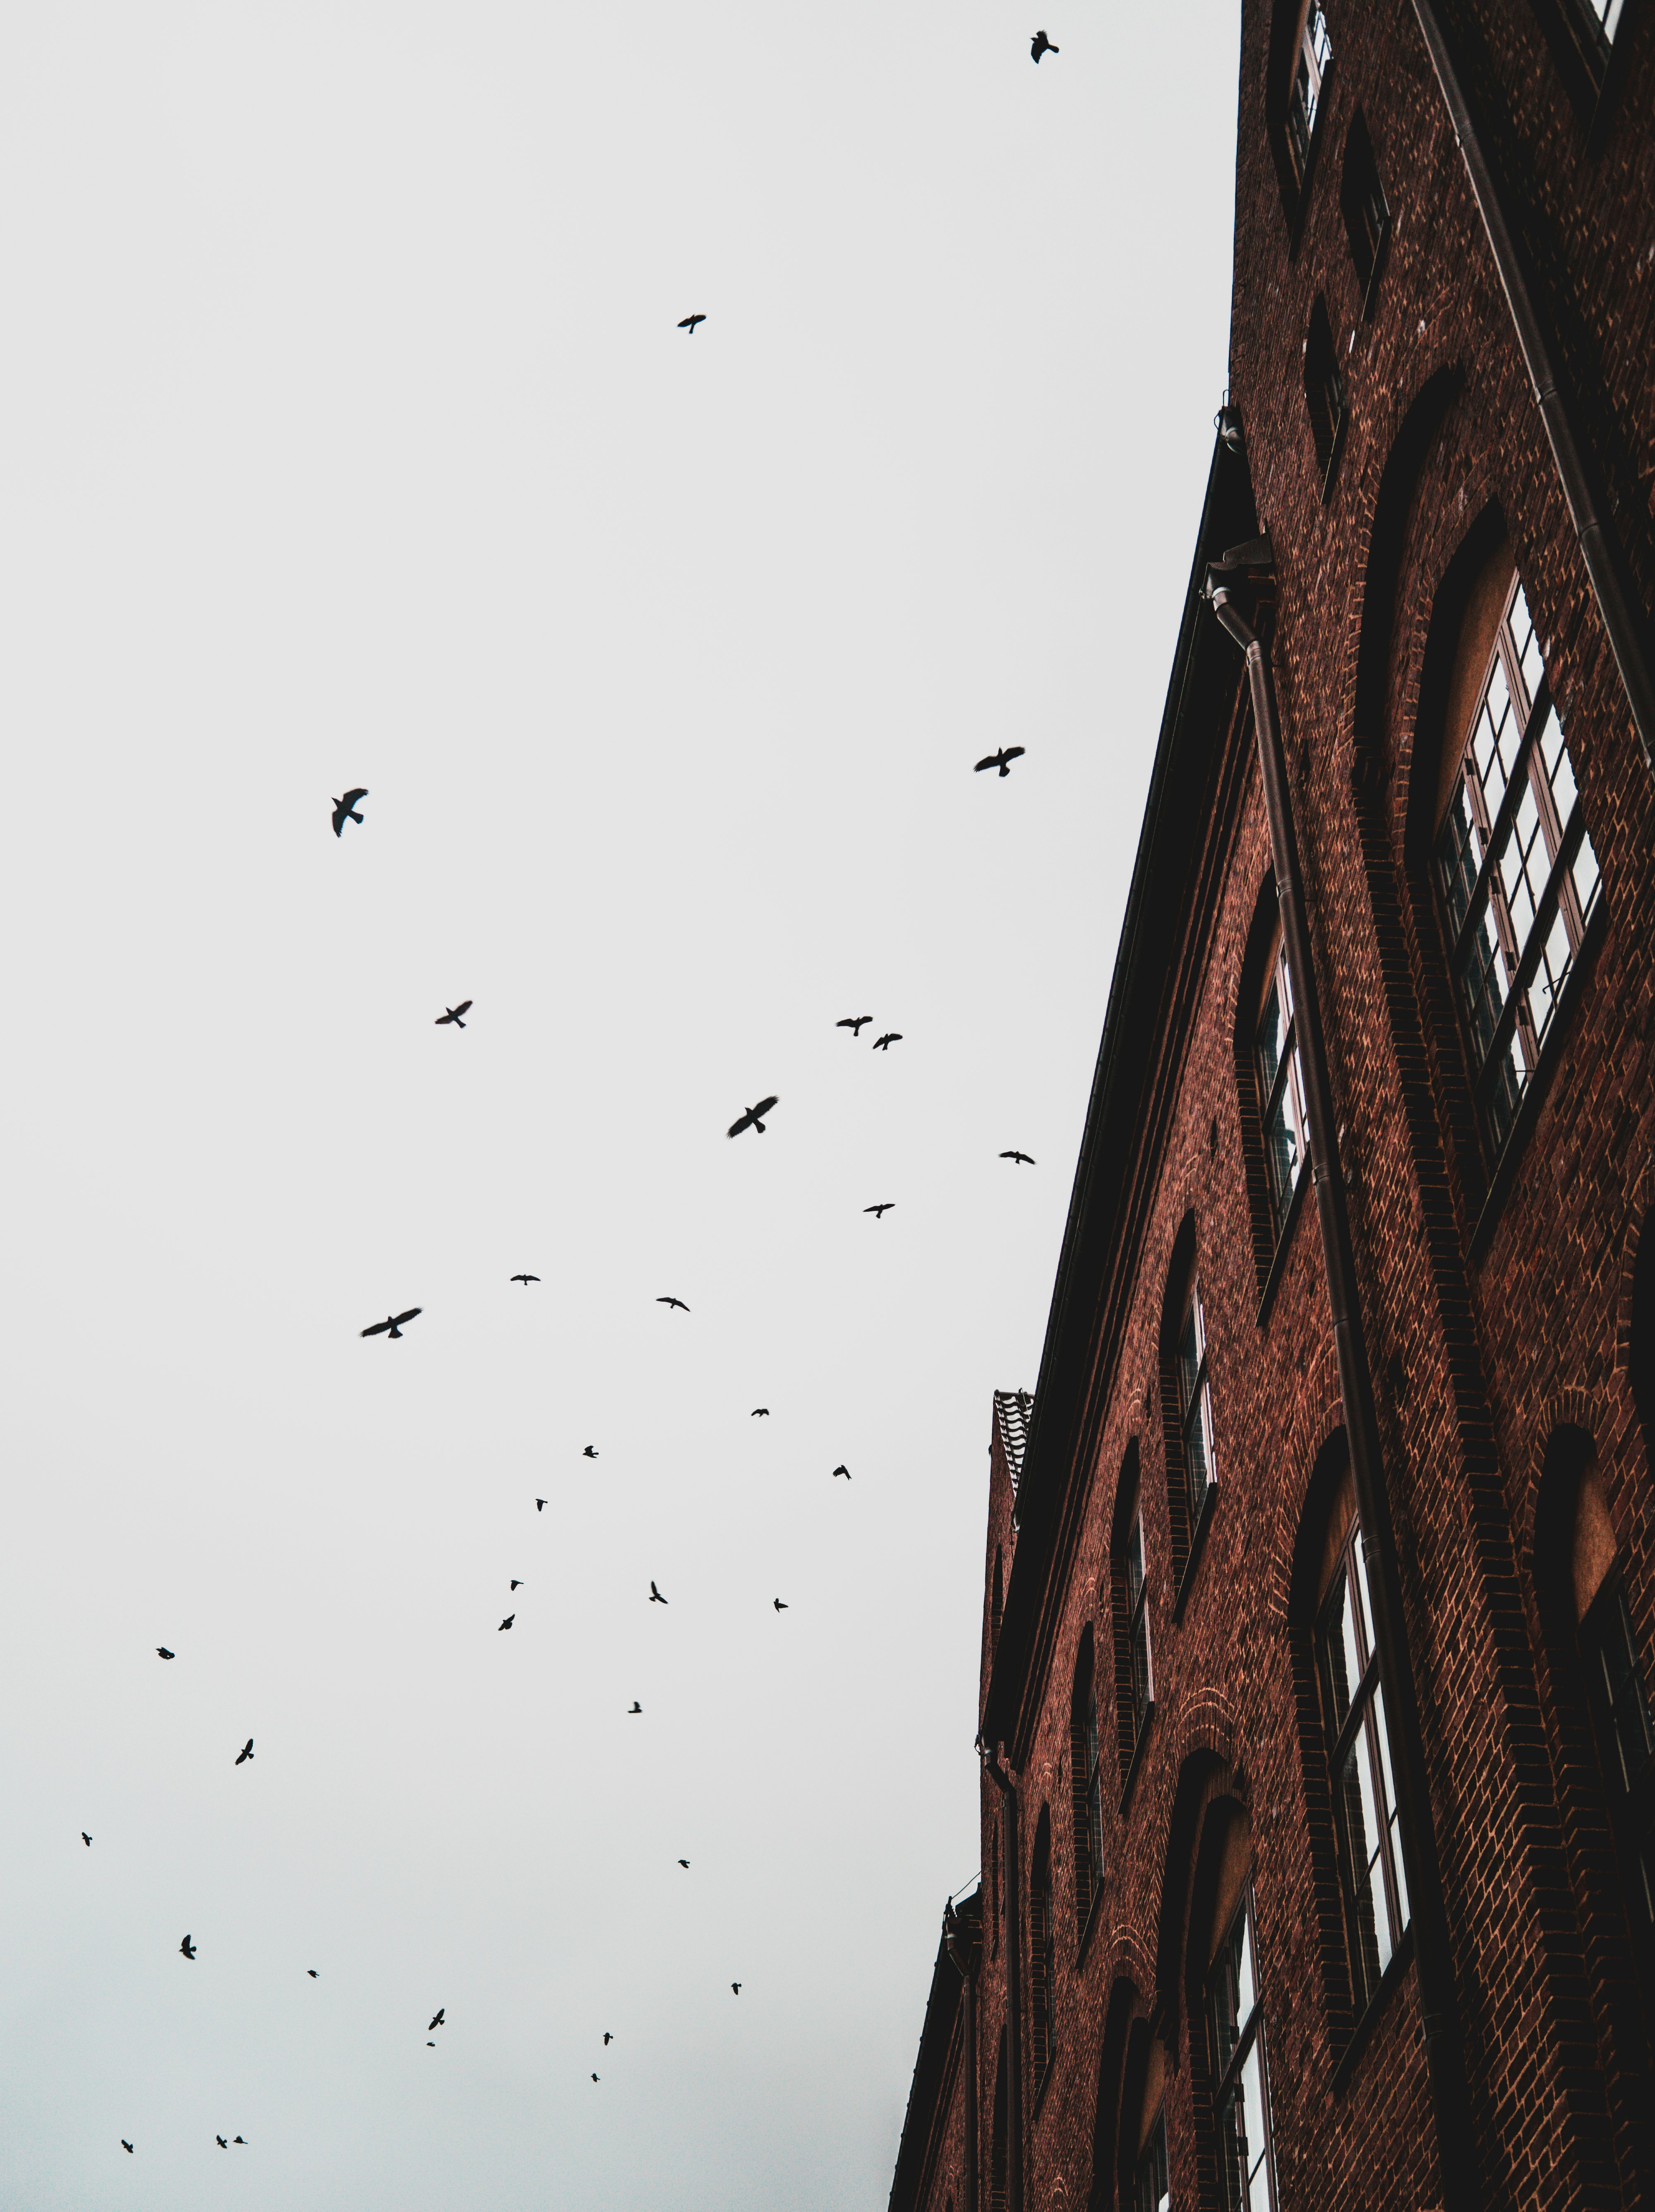 flock of birds flying over brown concrete building during daytime